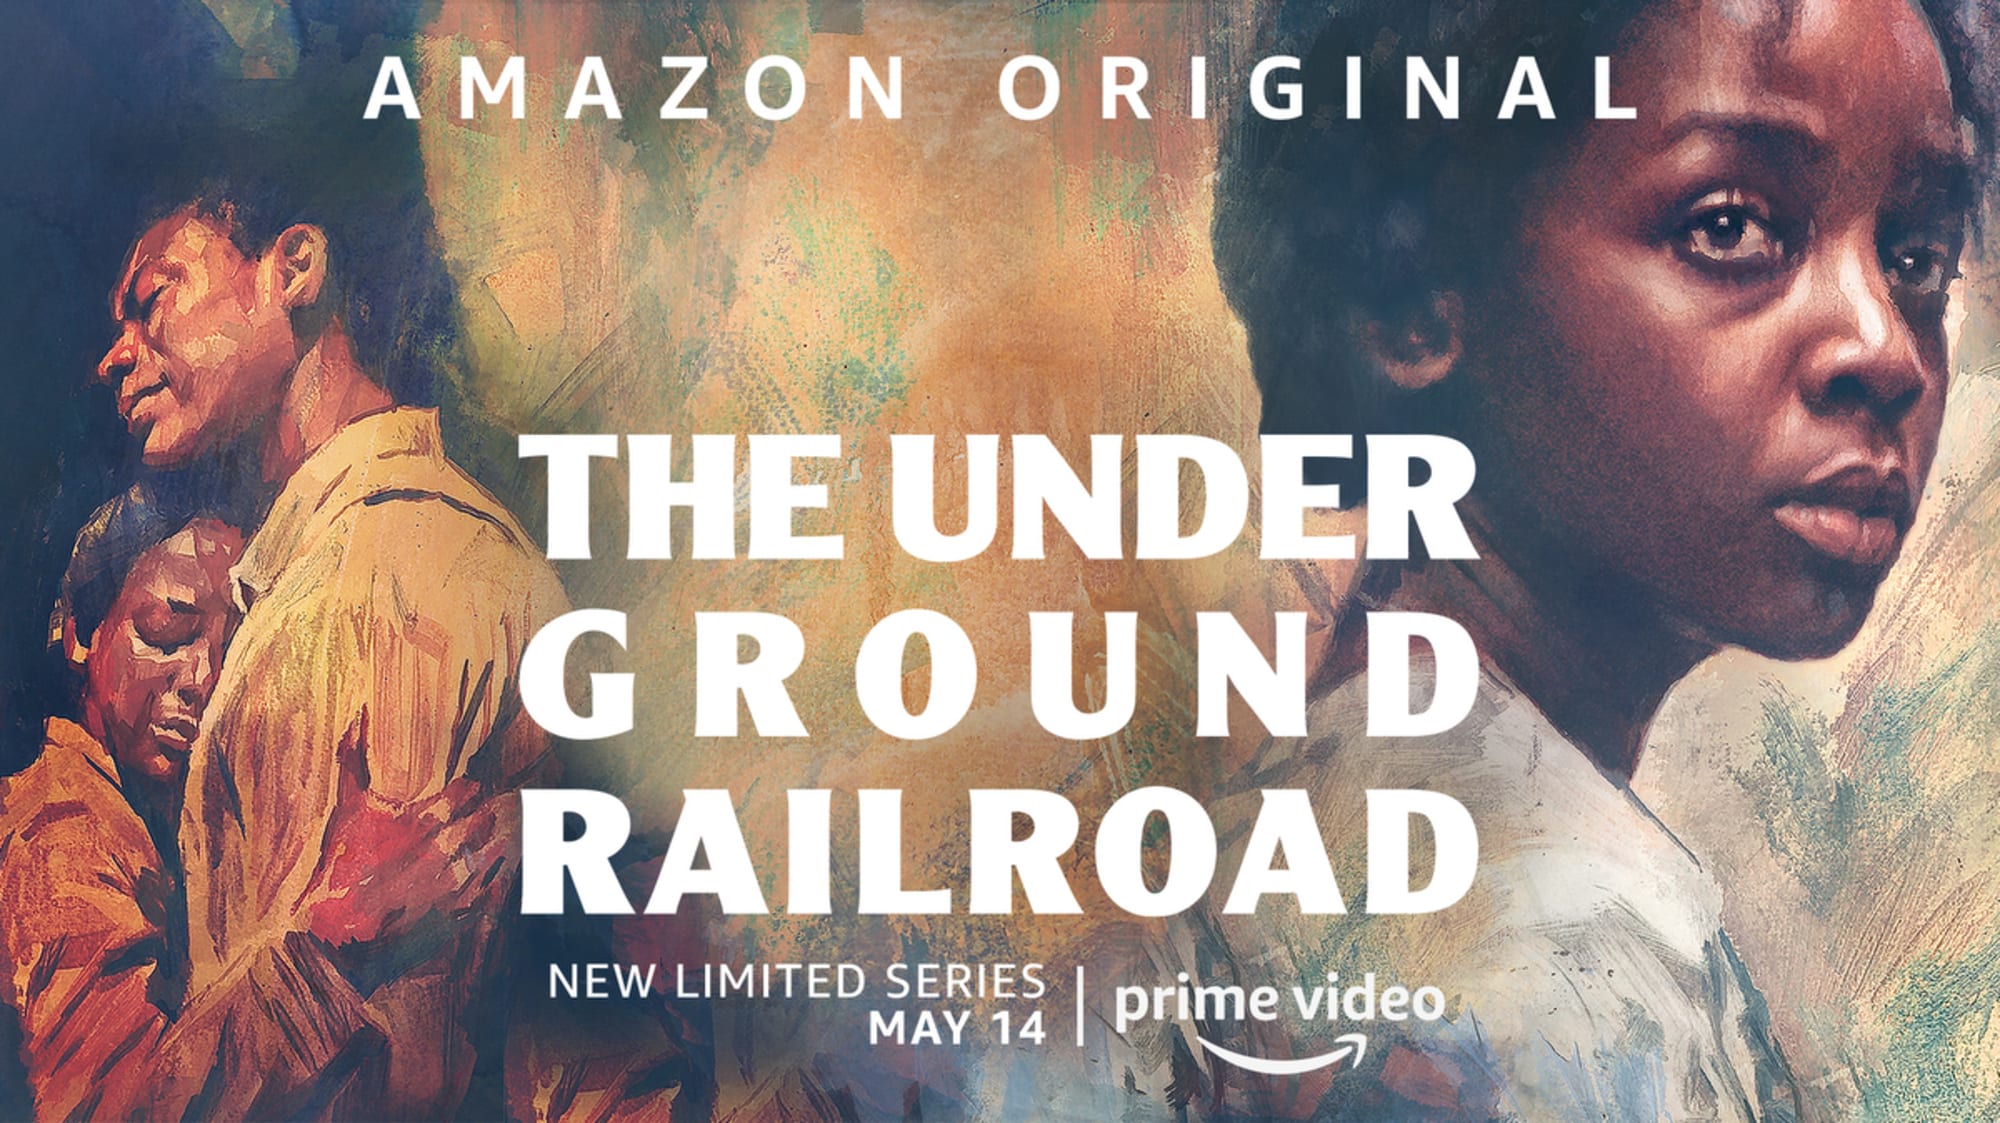 The Underground Railroad Release Date Cast Trailer Synopsis And More